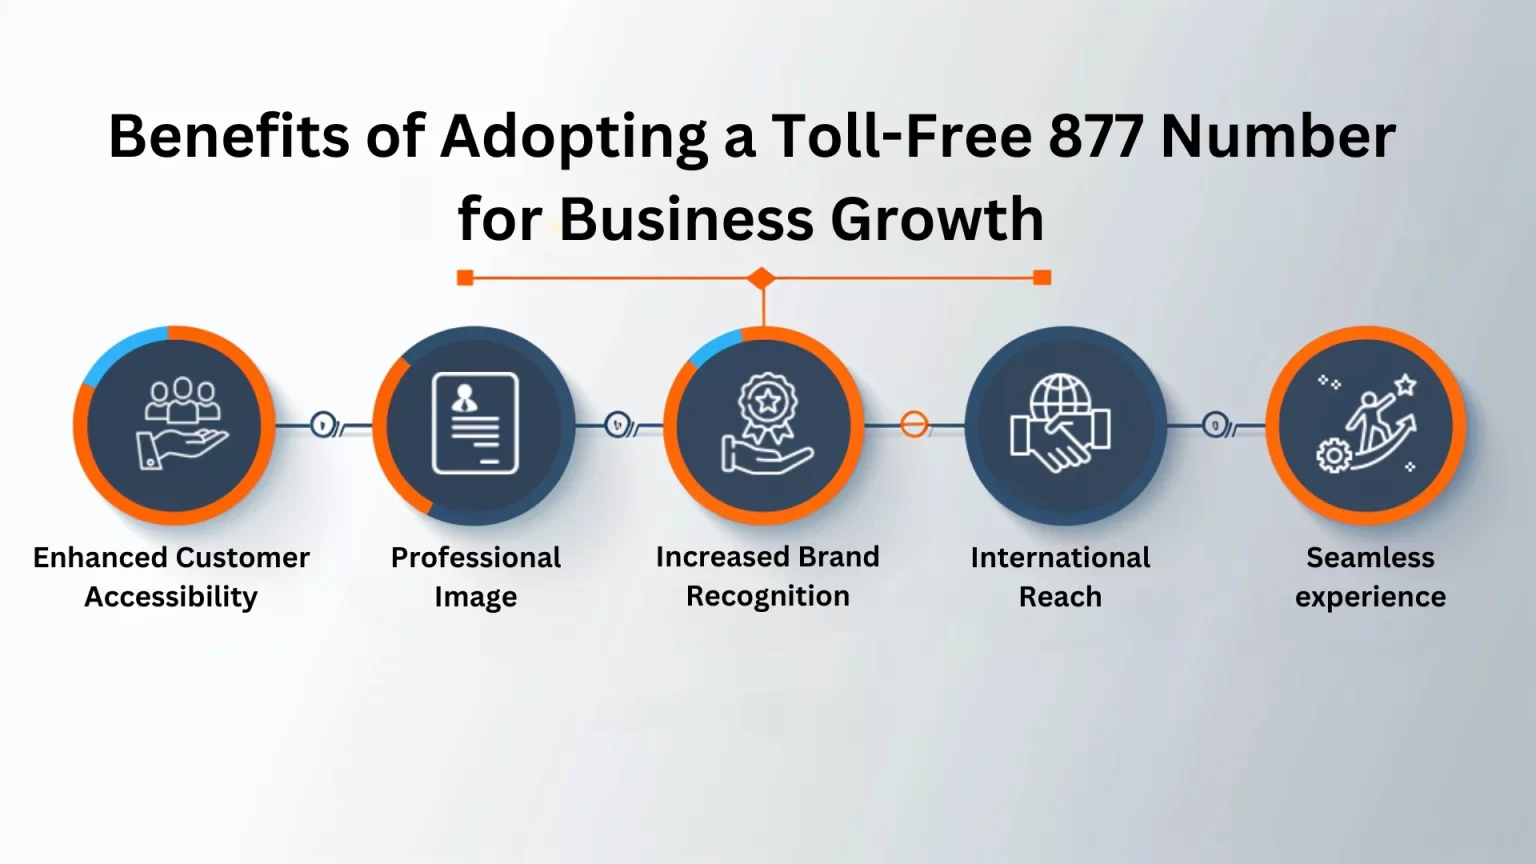 Benefits of Adopting a Toll-Free 877 Number for Business Growth